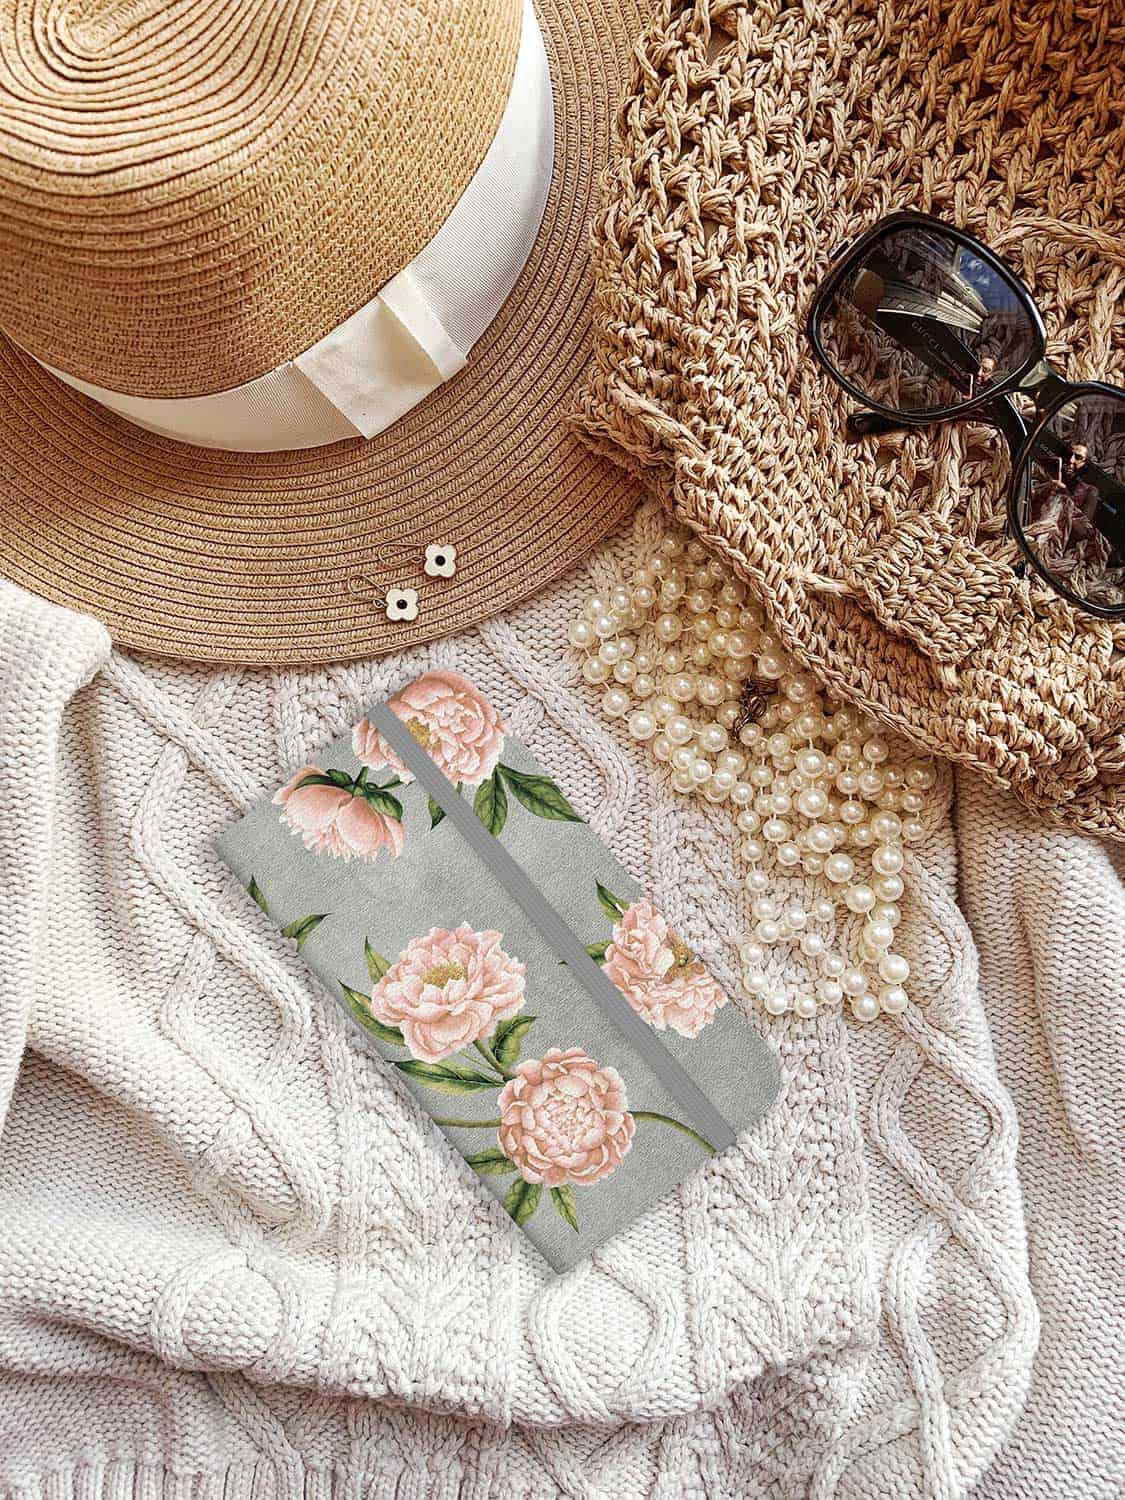 Fashion accessories flat lay: sunglasses, straw hat, earrings, jumper, floral phone case.